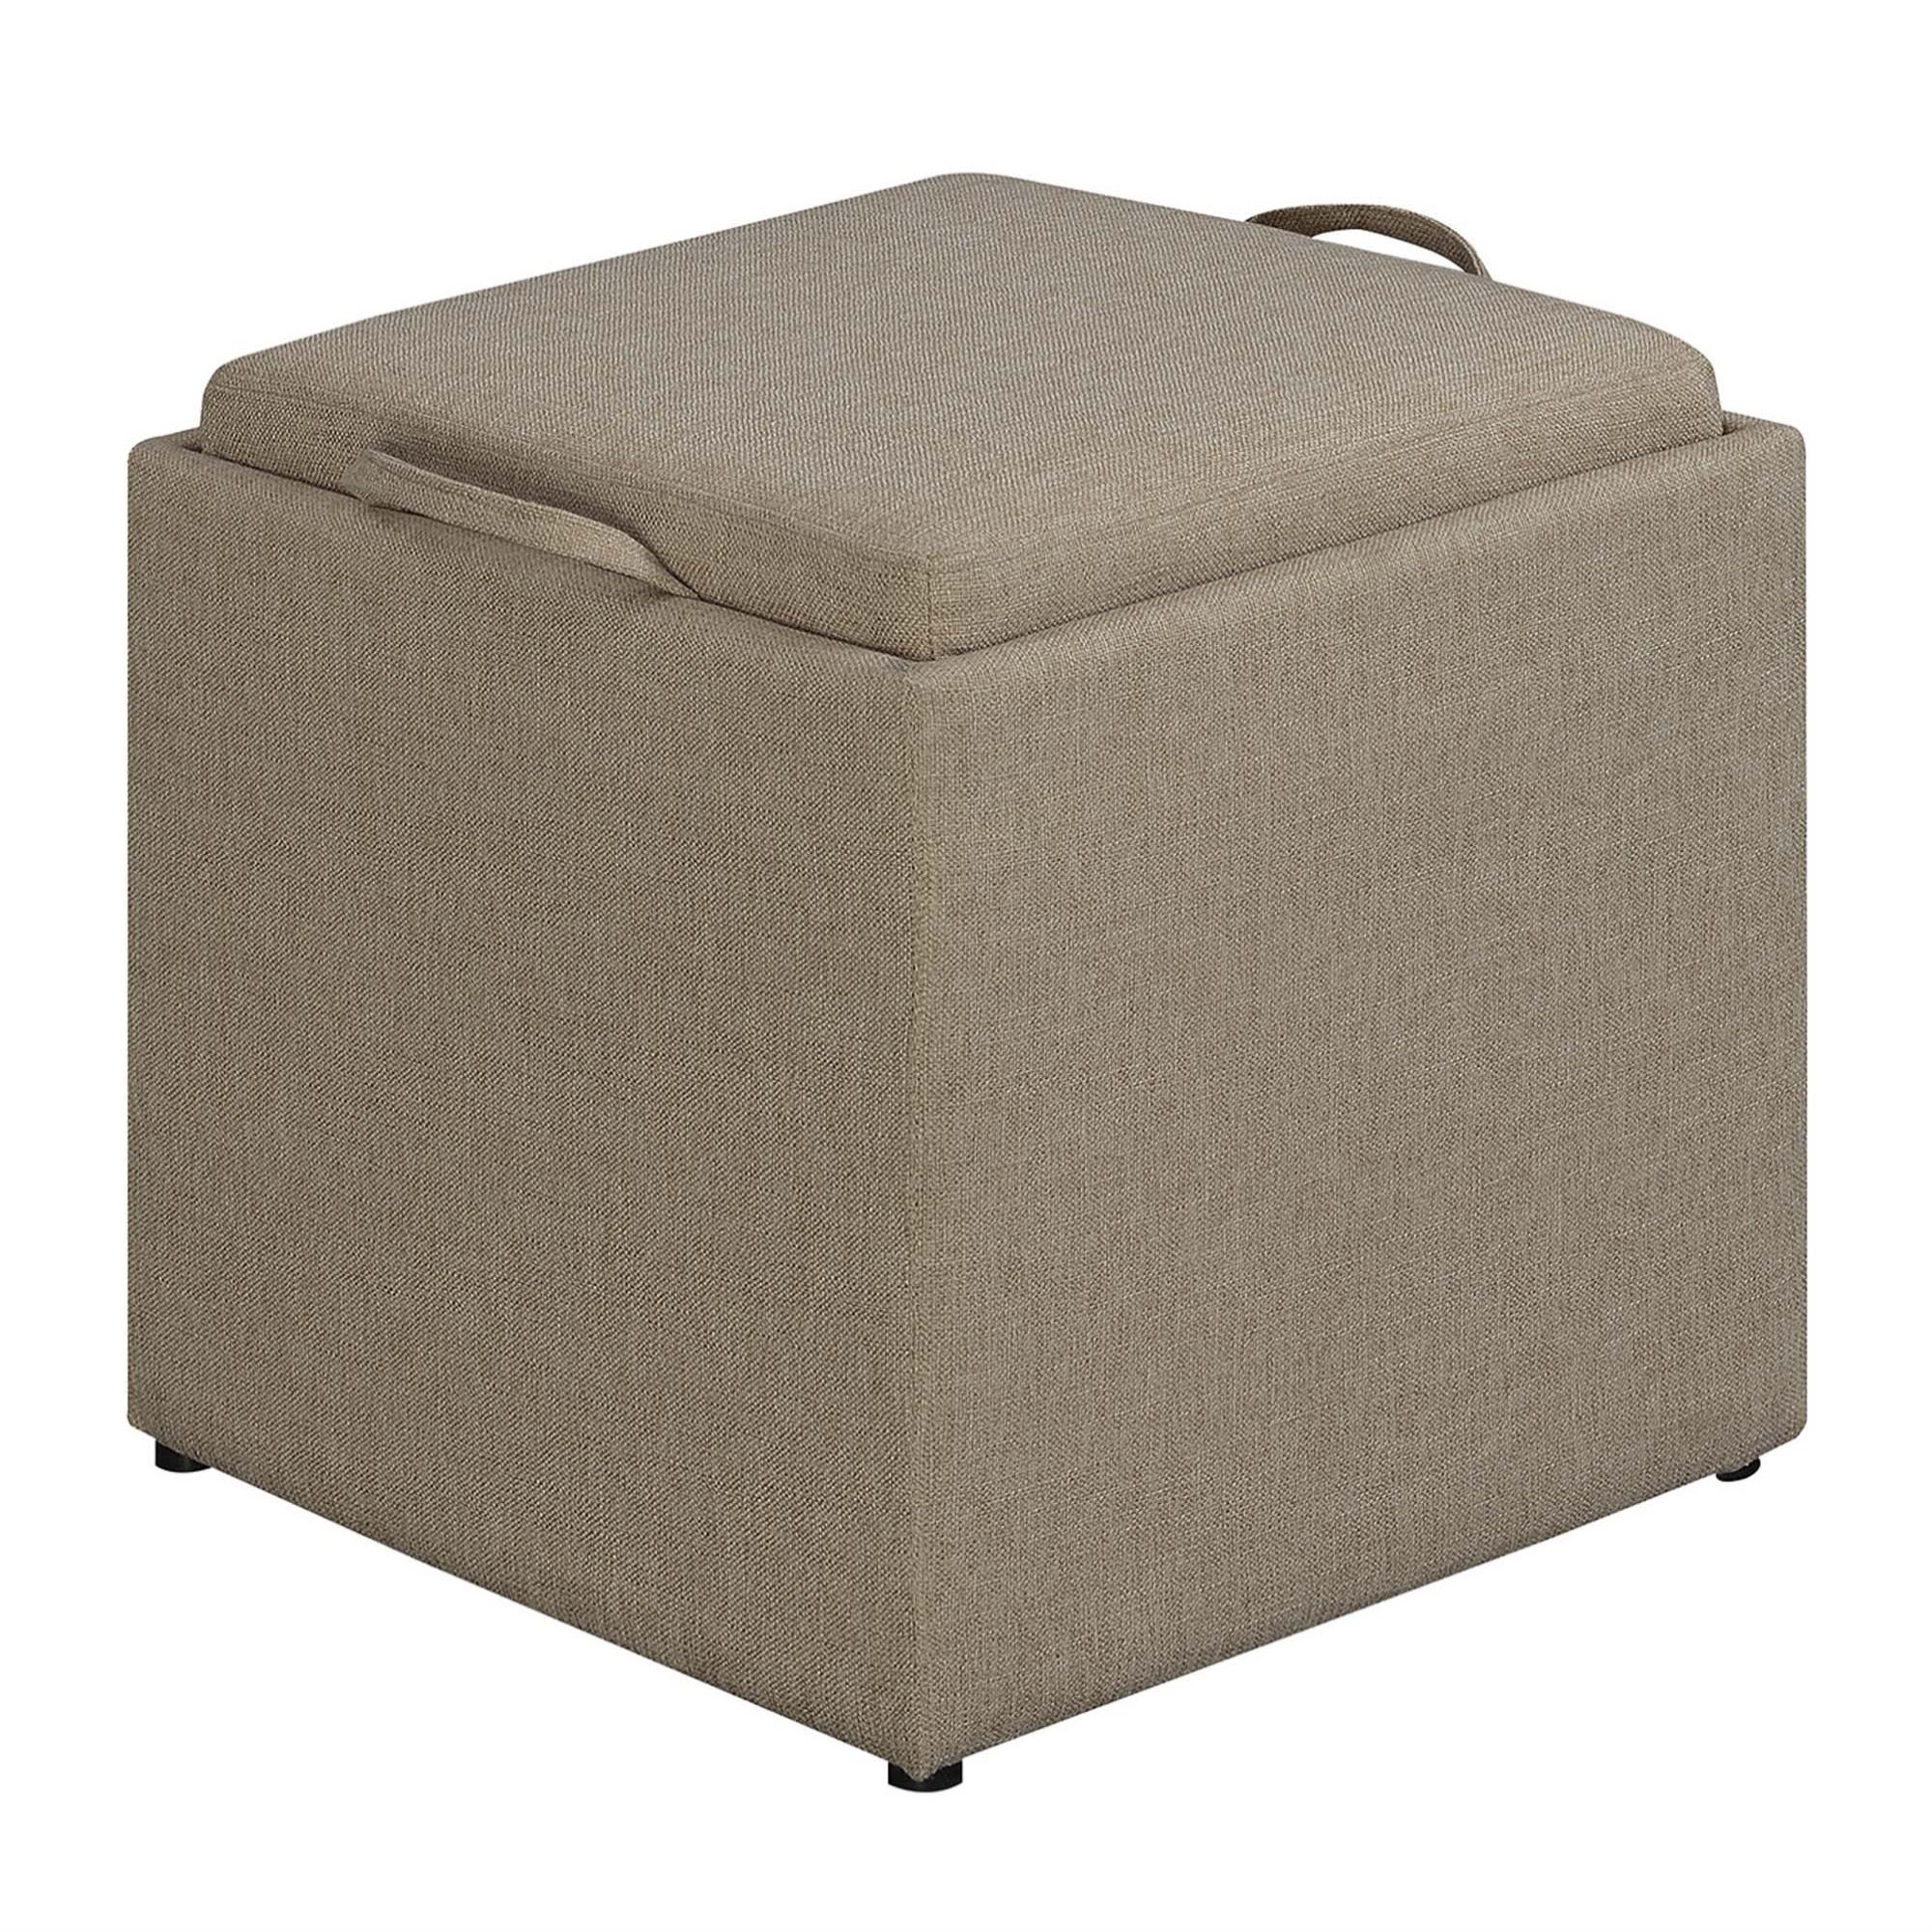 Ergode Designs4comfort Park Avenue Single Ottoman With Stool And Reversible  Tray – Walmart Throughout Ottomans With Stool And Reversible Tray (View 8 of 15)